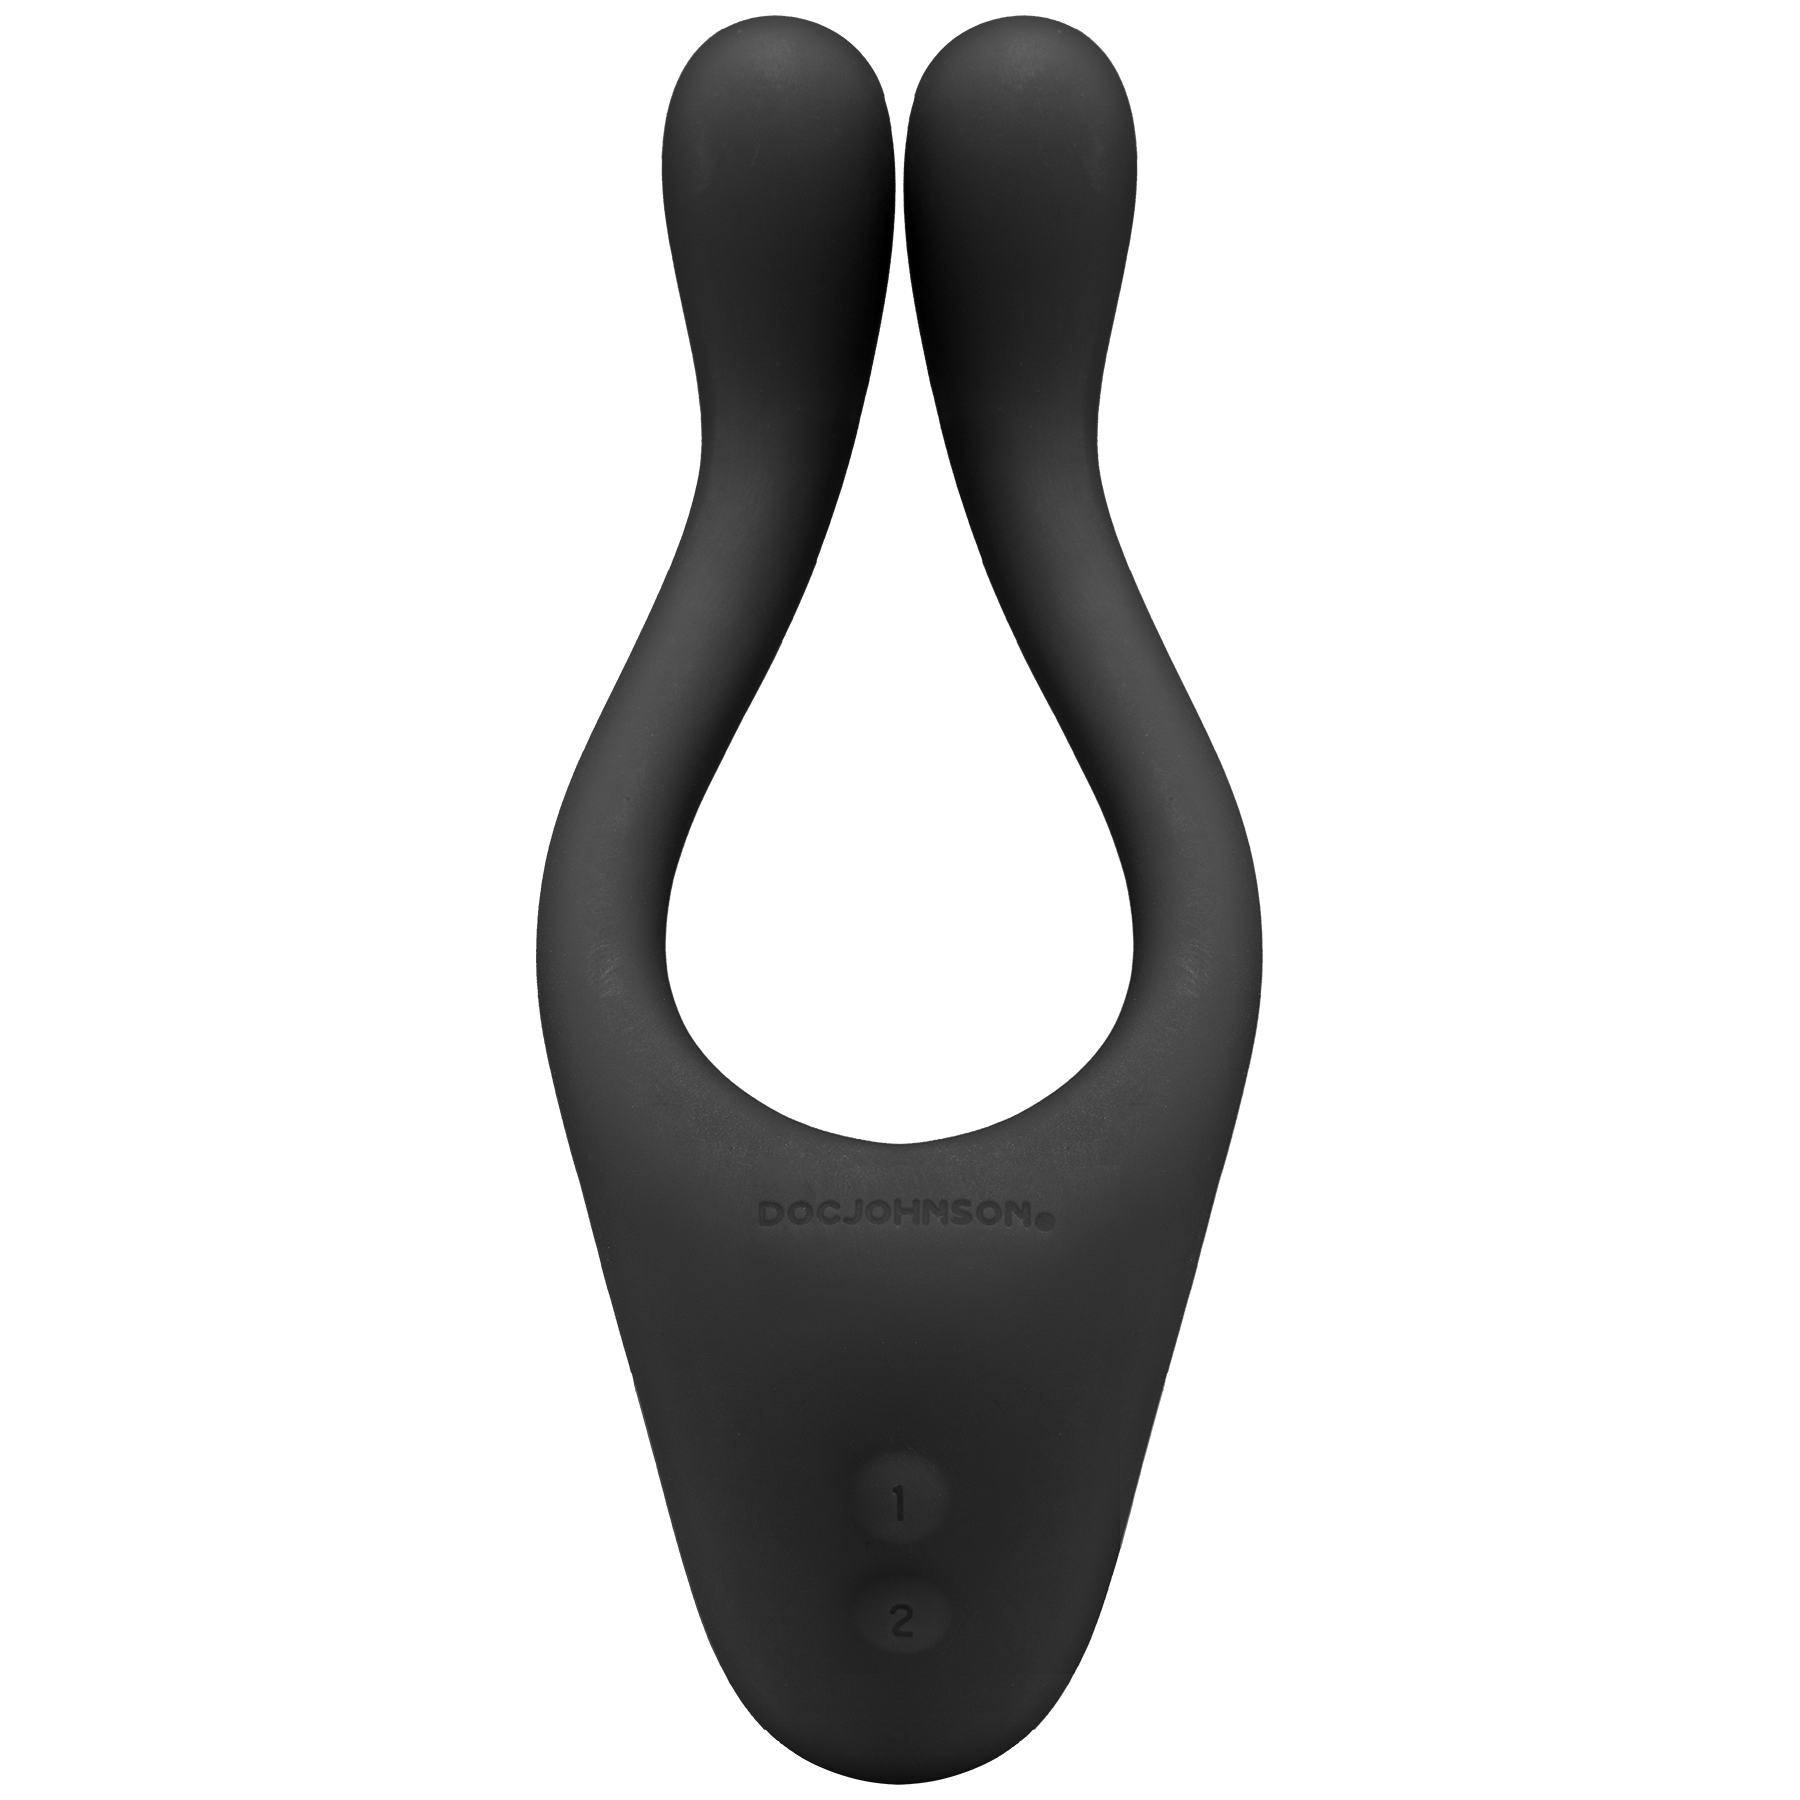 TRYST - Multi Erogenous Zone Massager